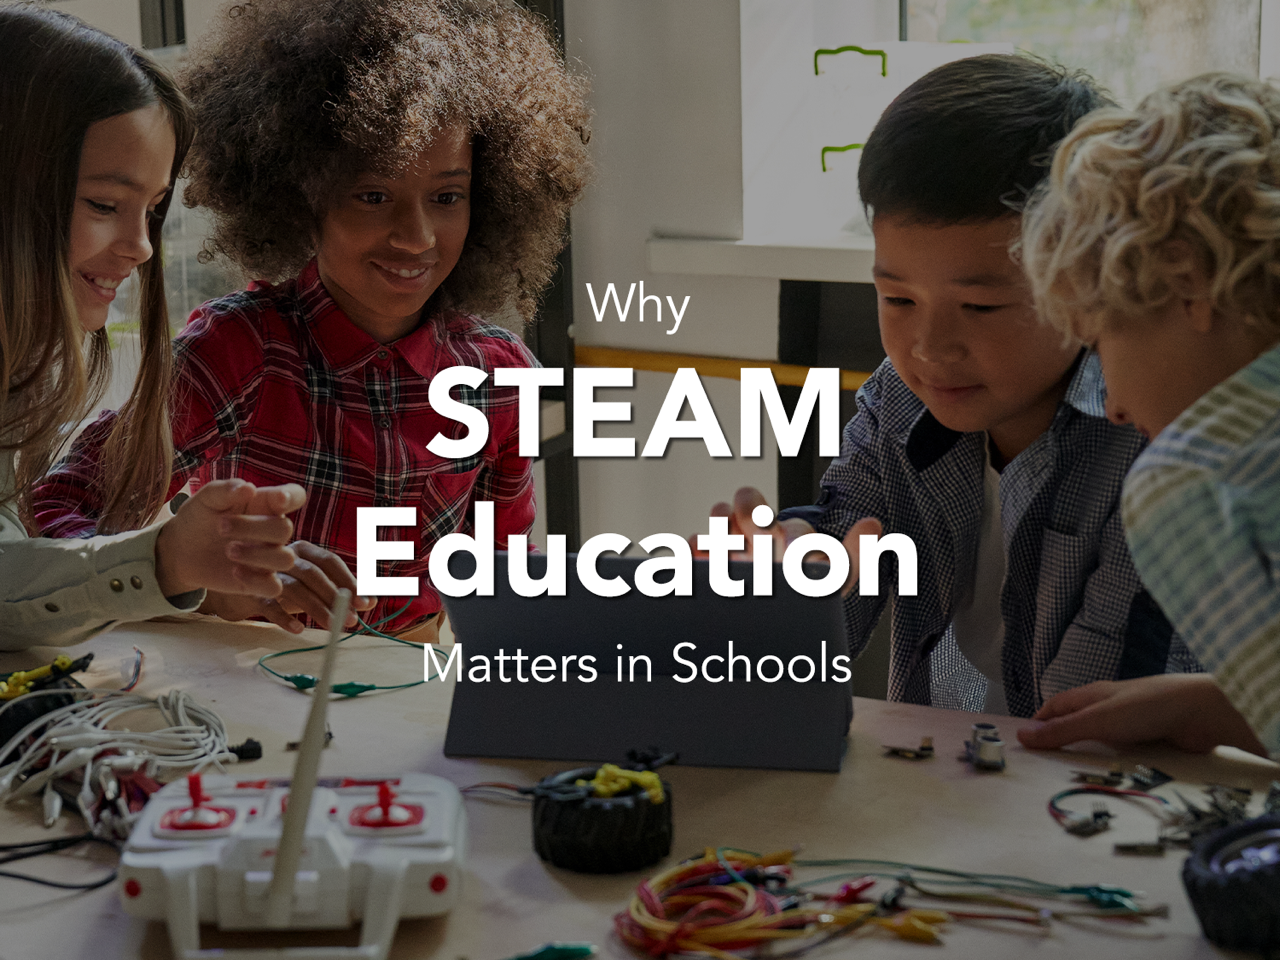 Why STEAM Education Matters in Schools